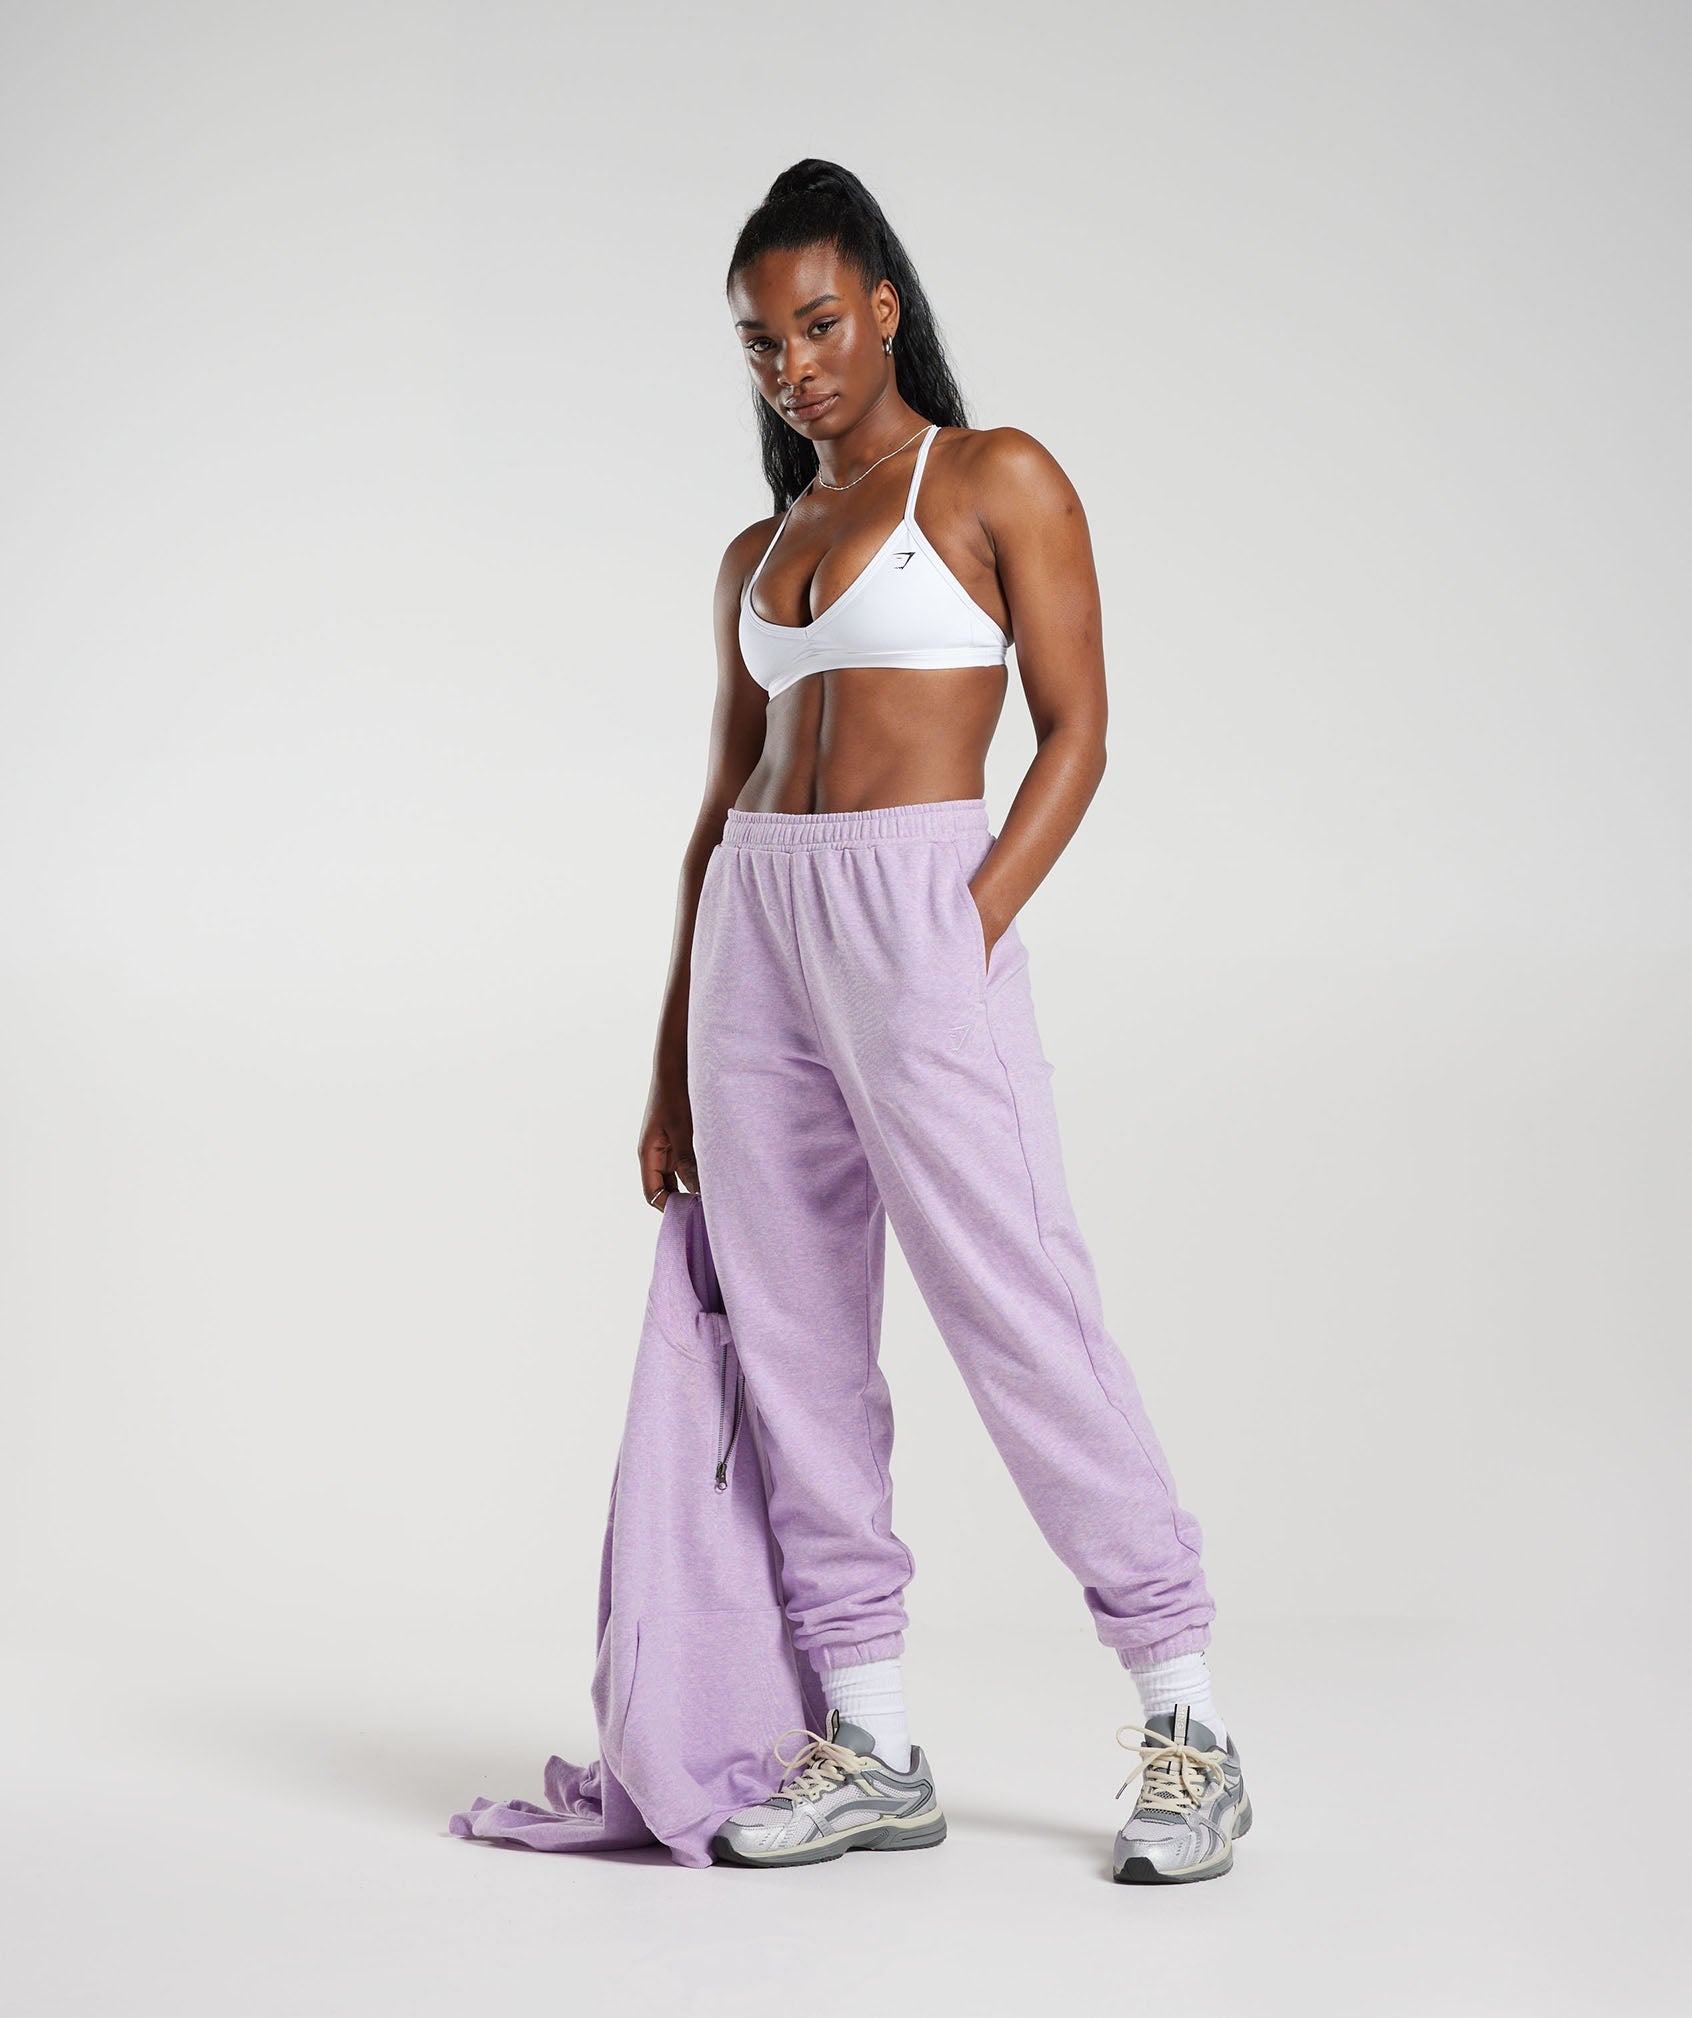 Rest Day Sweats Joggers in Aura Lilac Marl - view 4